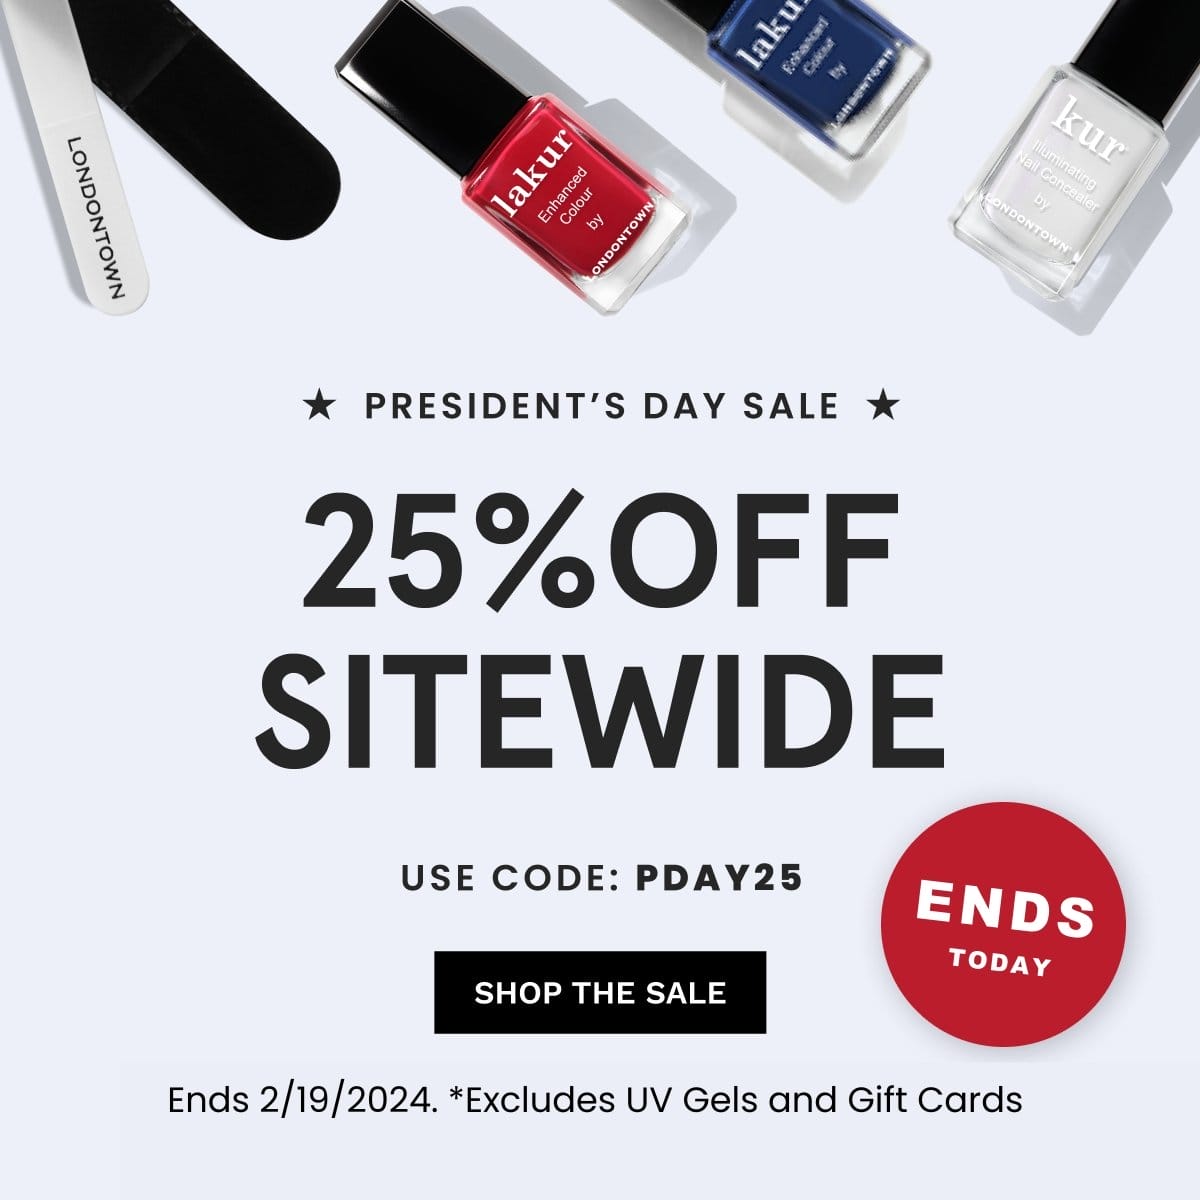 25% OFF! Use Code PDAY25